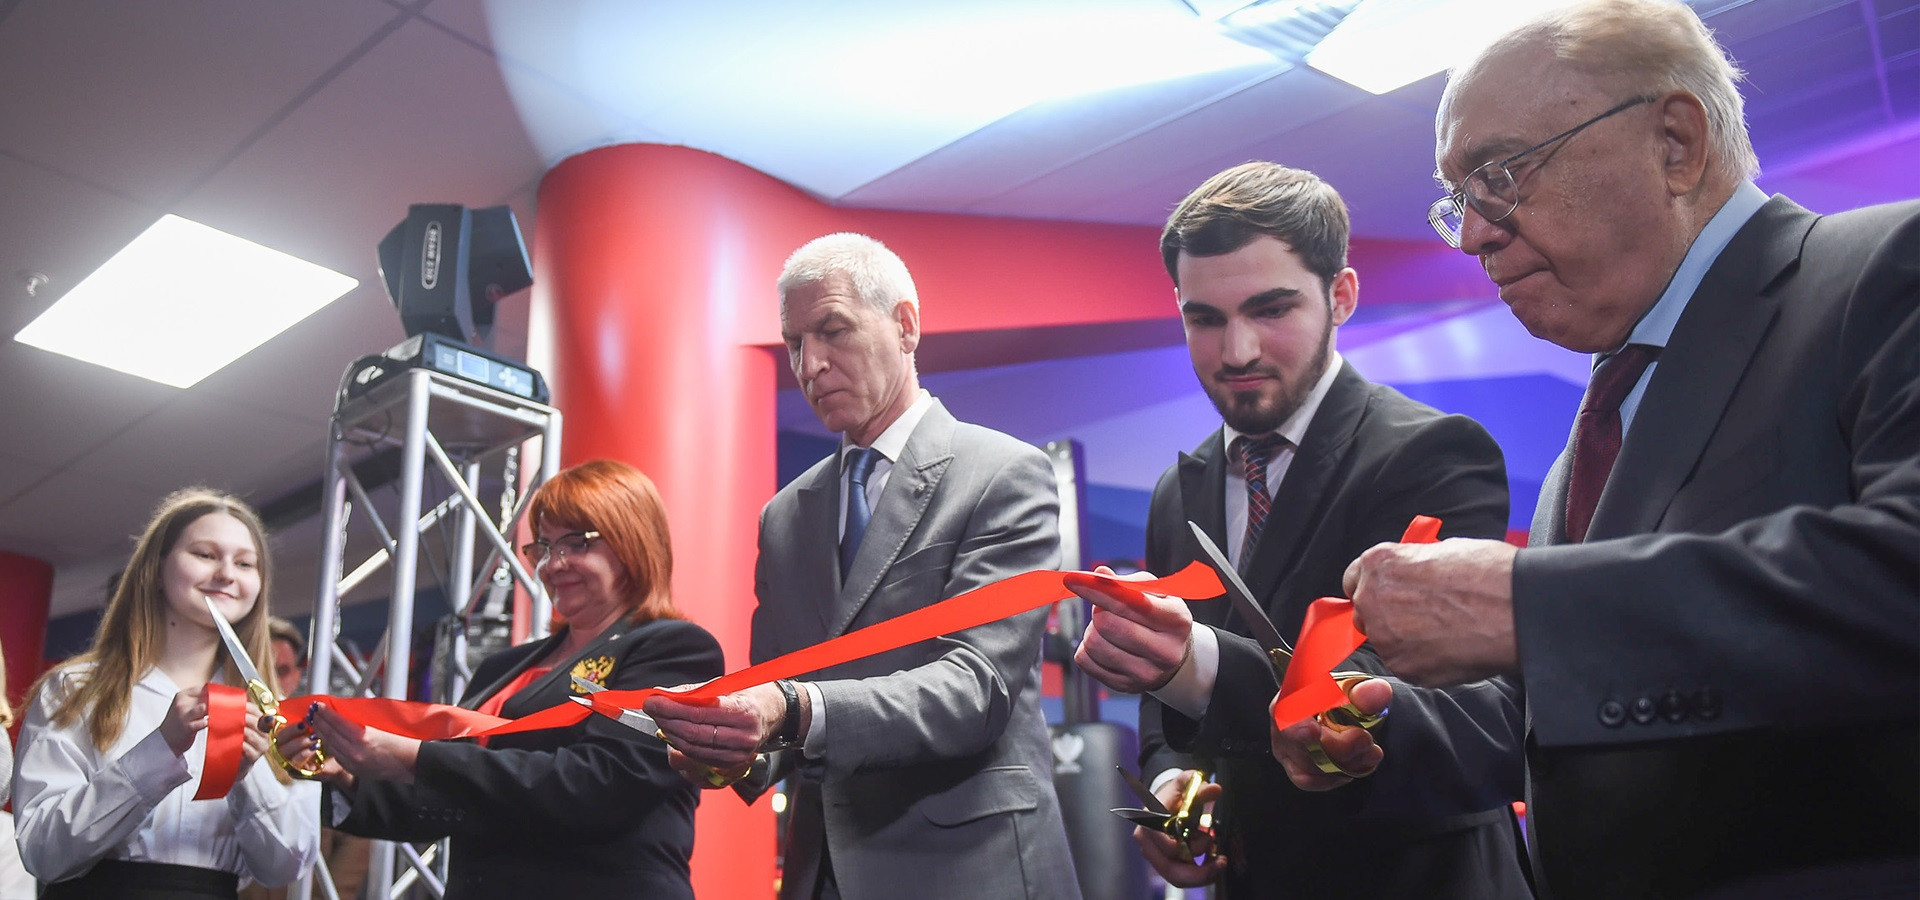 Russian Sports Minister Oleg Matytsin, centre, was on hand to help open the Center for the Progress of University Sports of Moscow State University ©RBF